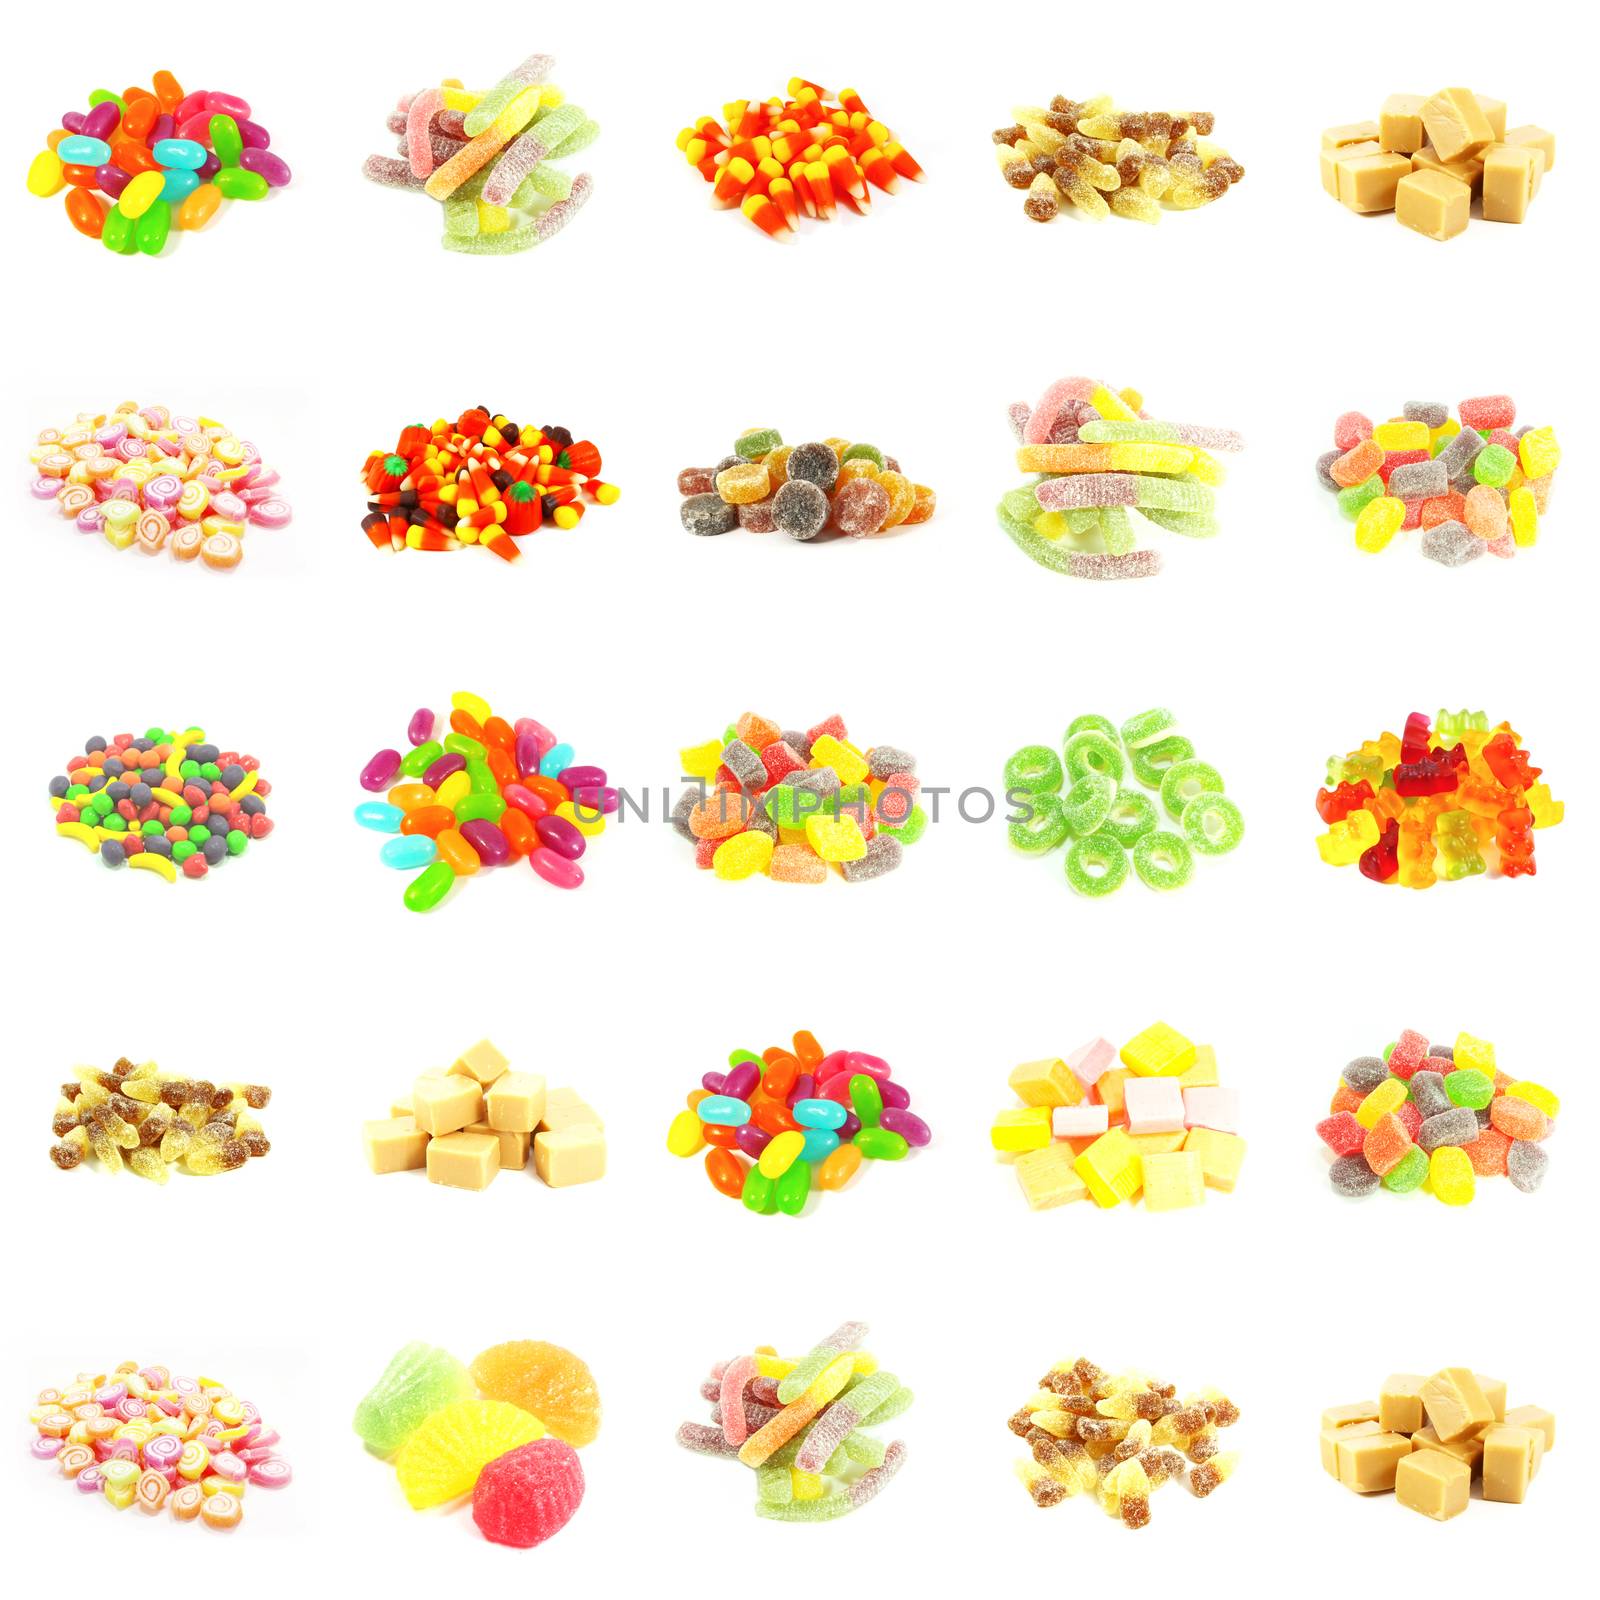 Repeating Candy Background and Isolated on White Art